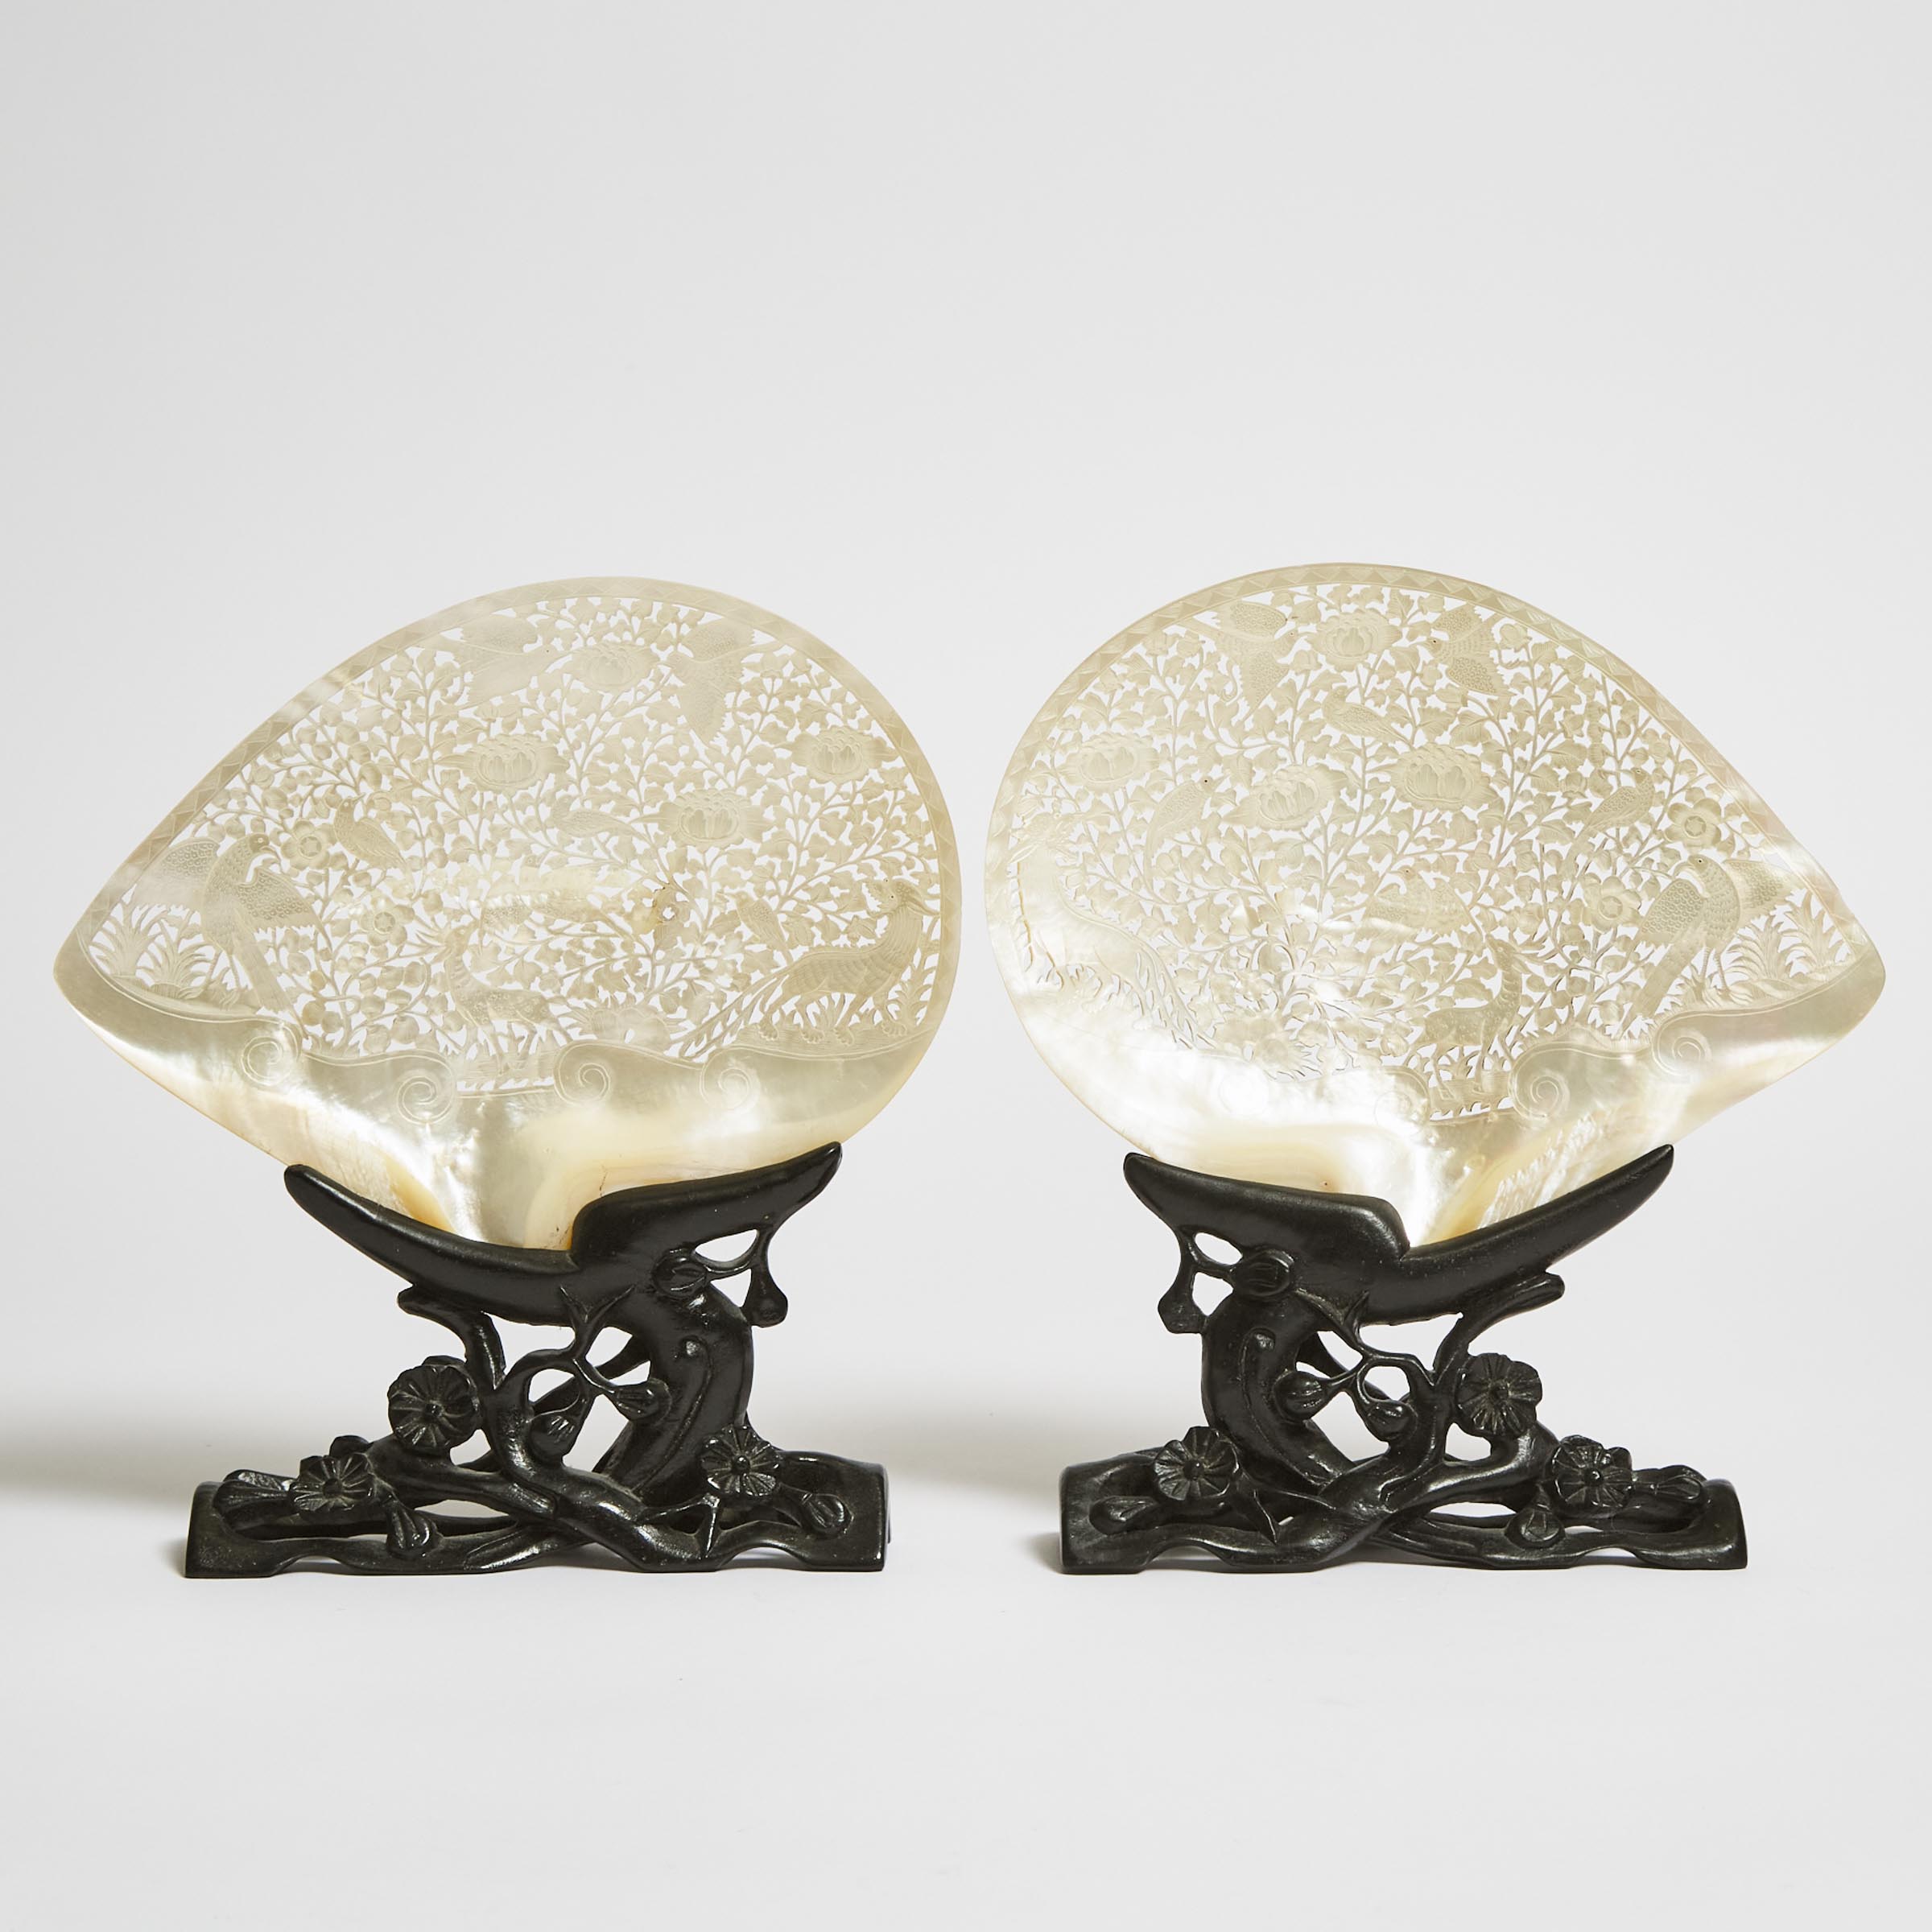 A Pair of Chinese Carved Mother of Pearl 2f2c88